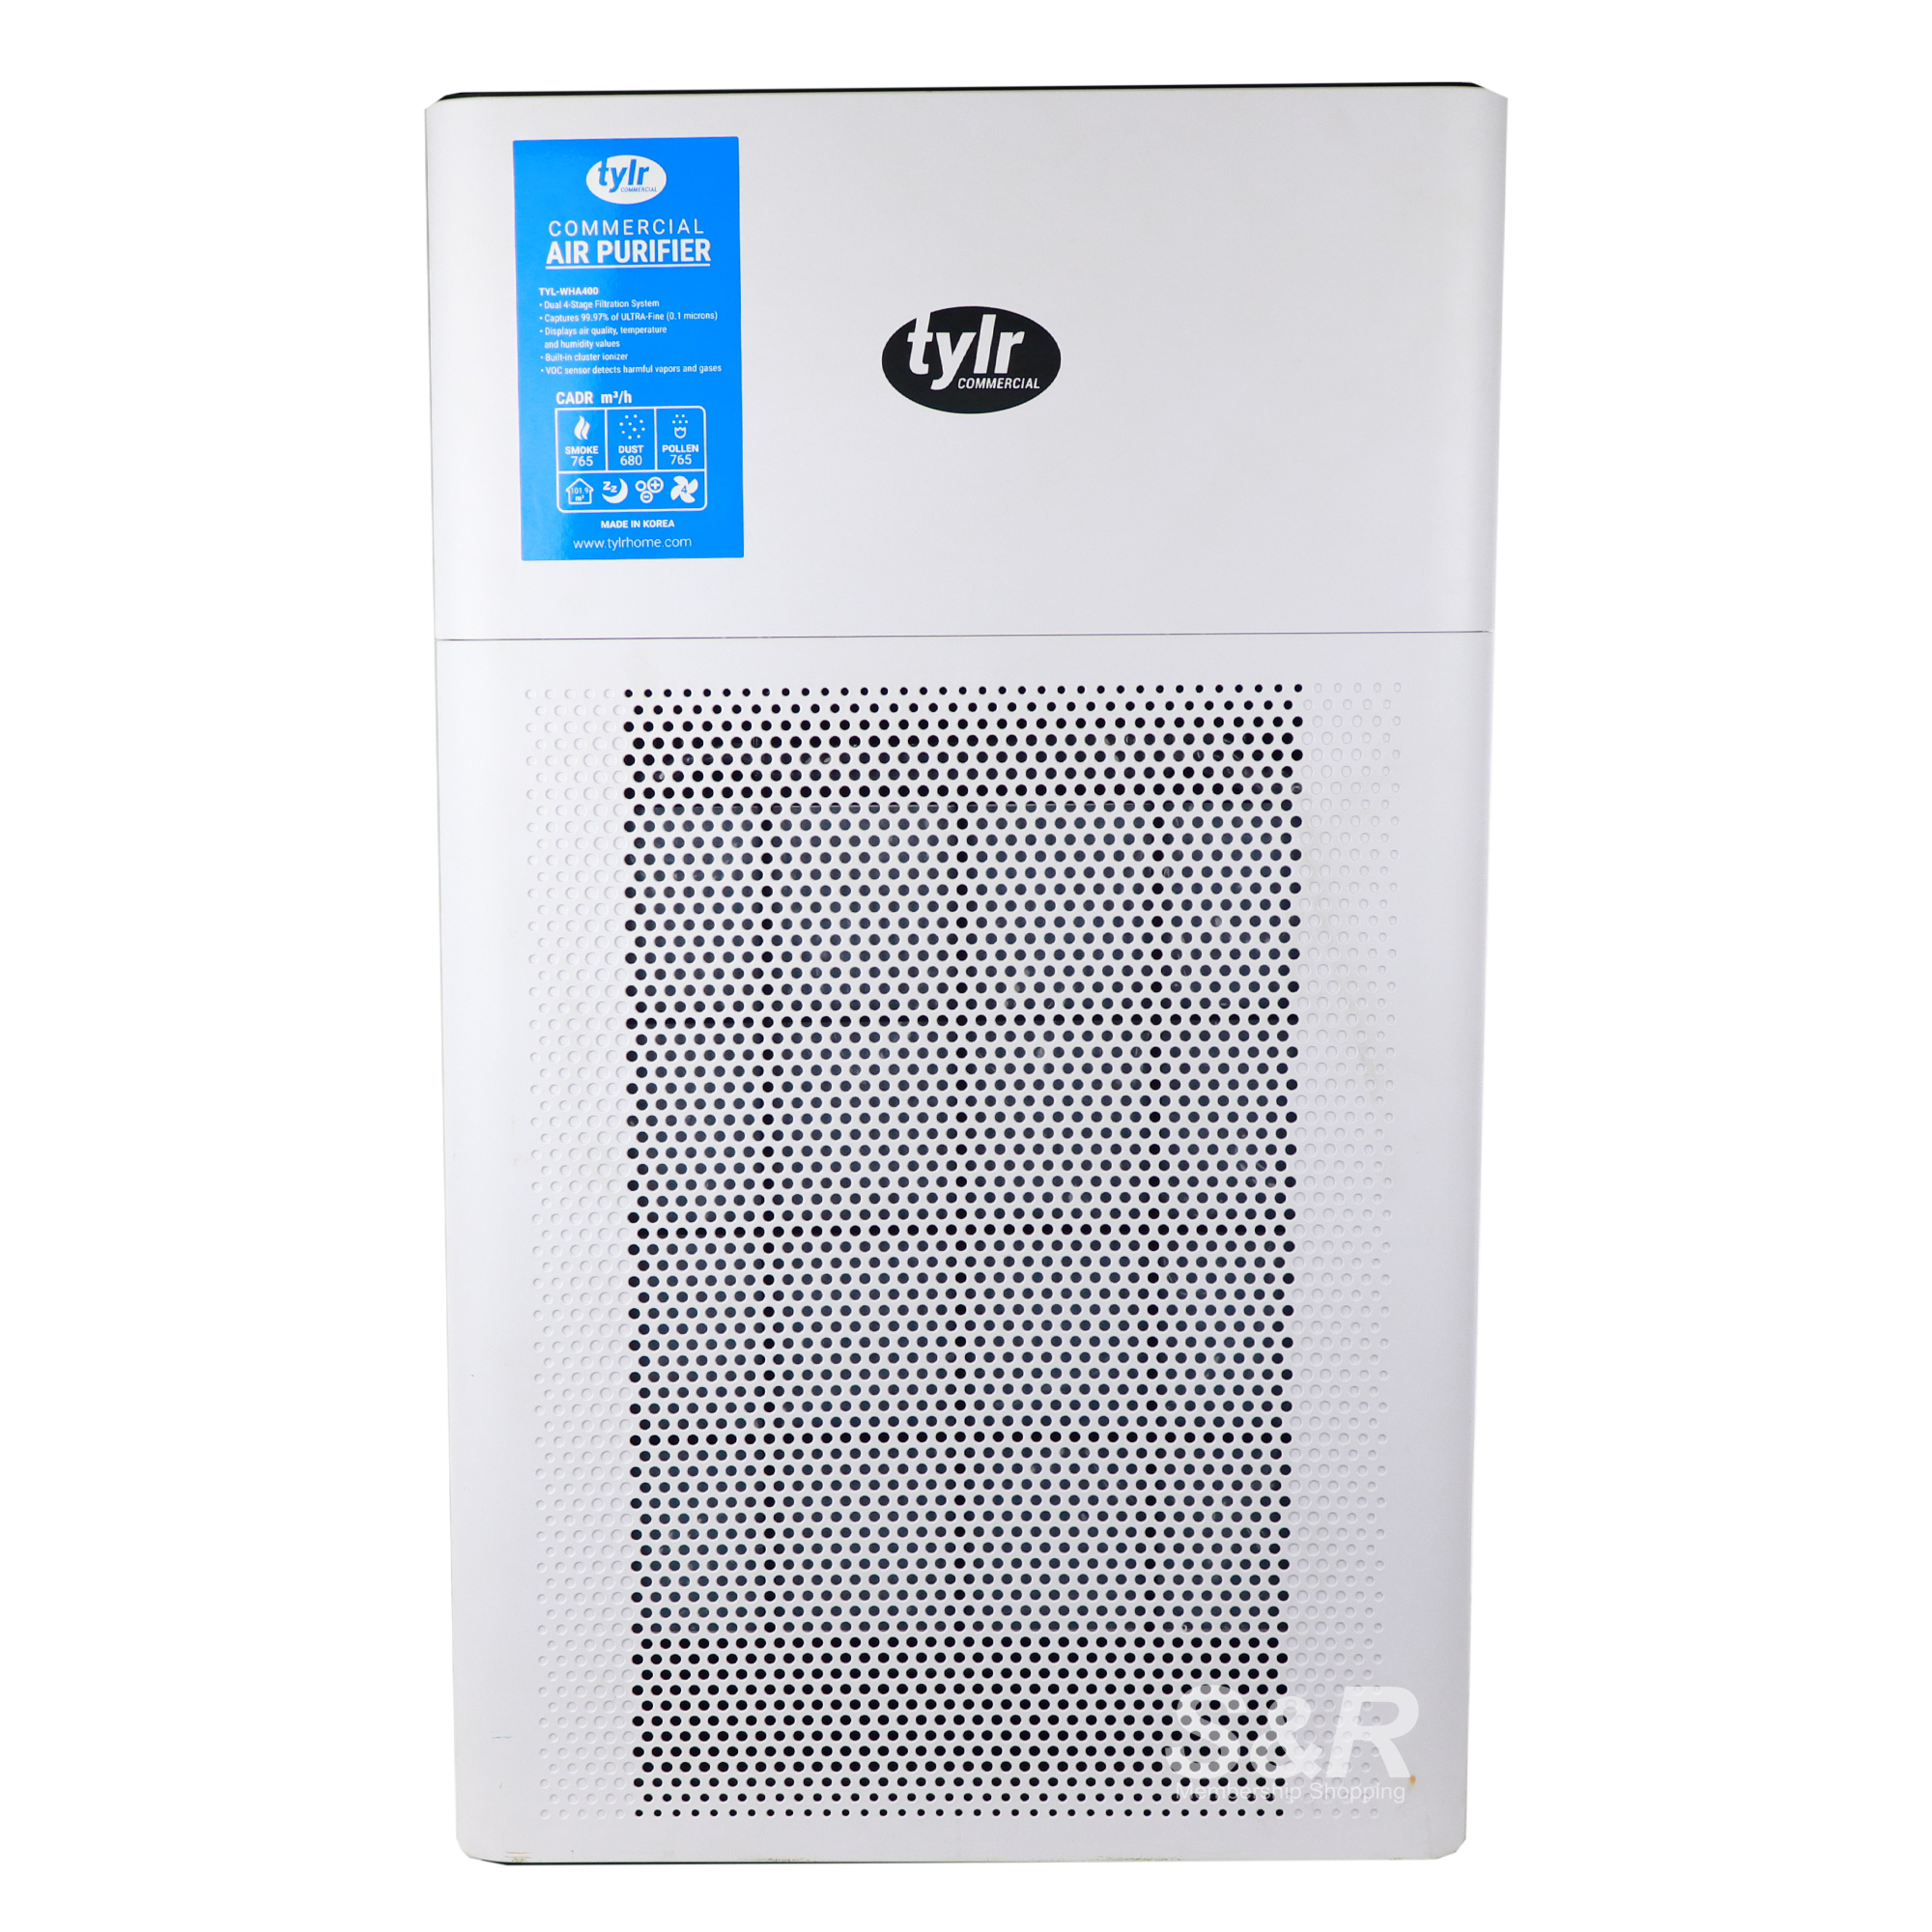 Tylr Commercial Air Purifier TYL-WHA400